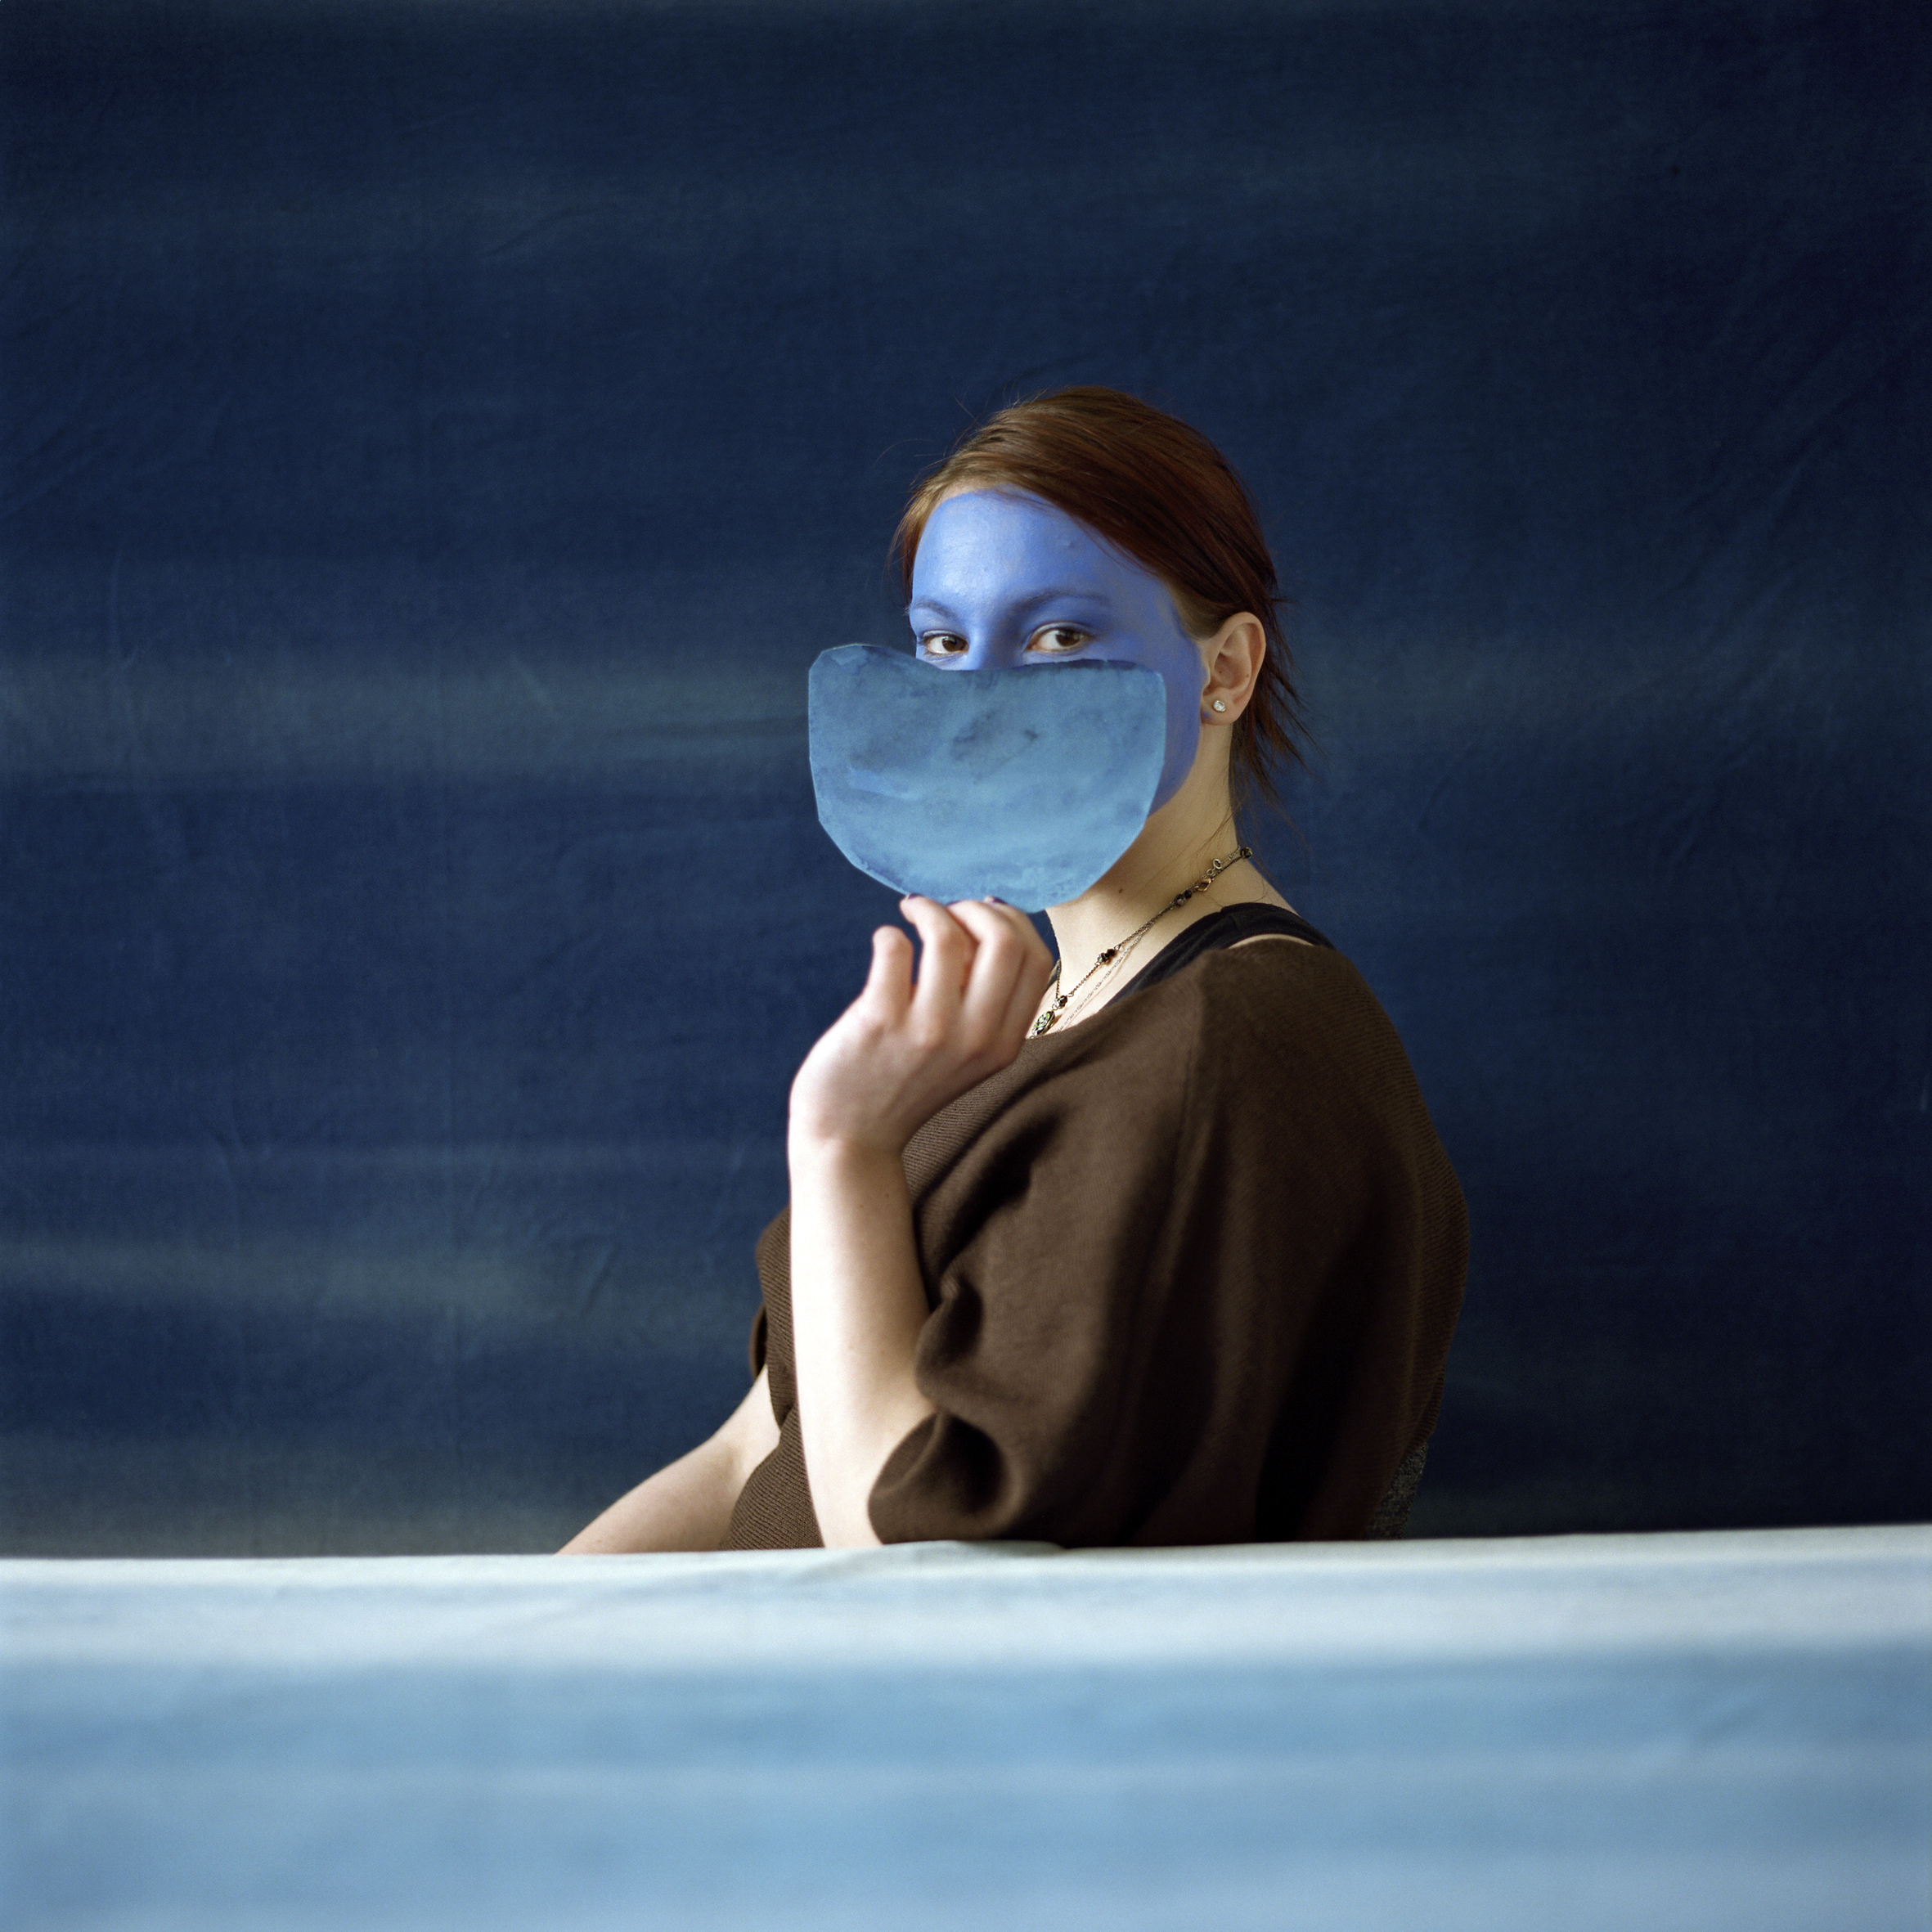 Layla Rudneva-McKay, Blue, 2009, C-Type print, Collection of the Arts House Trust